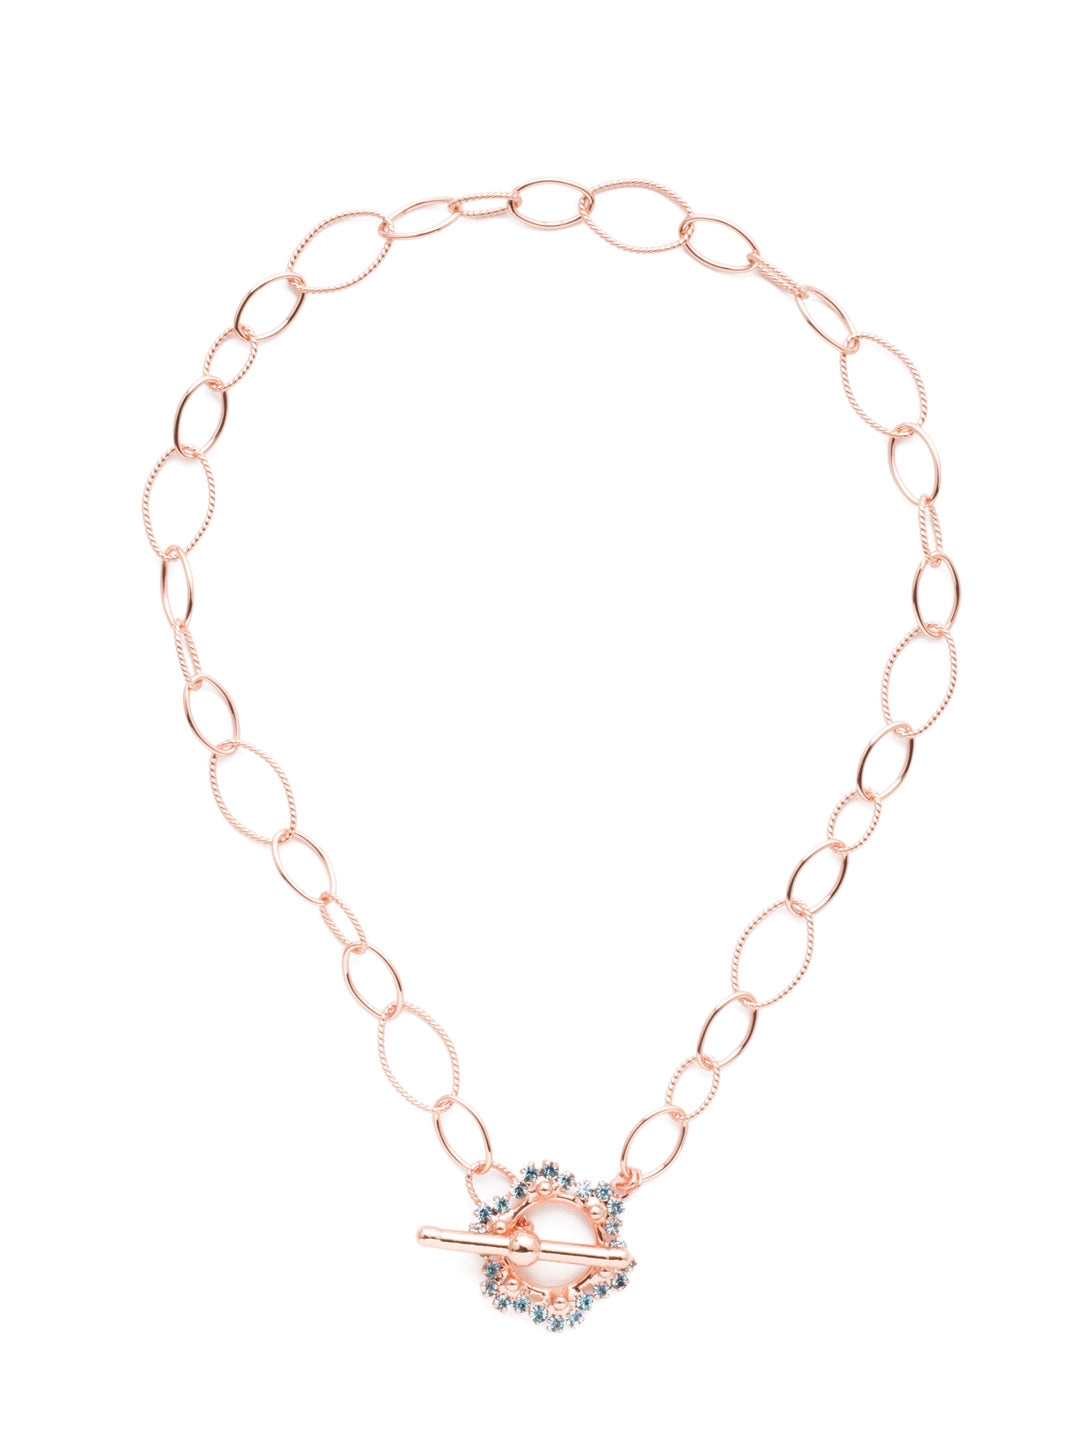 Chelsea Tennis Necklace - NET9RGCAZ - <p>The Chelsea Tennis Pendant Necklace lets unique filigree metalwork take center stage, as it should. Get ready for everyone to ask, "Where did you get that?" From Sorrelli's Crystal Azure collection in our Rose Gold-tone finish.</p>